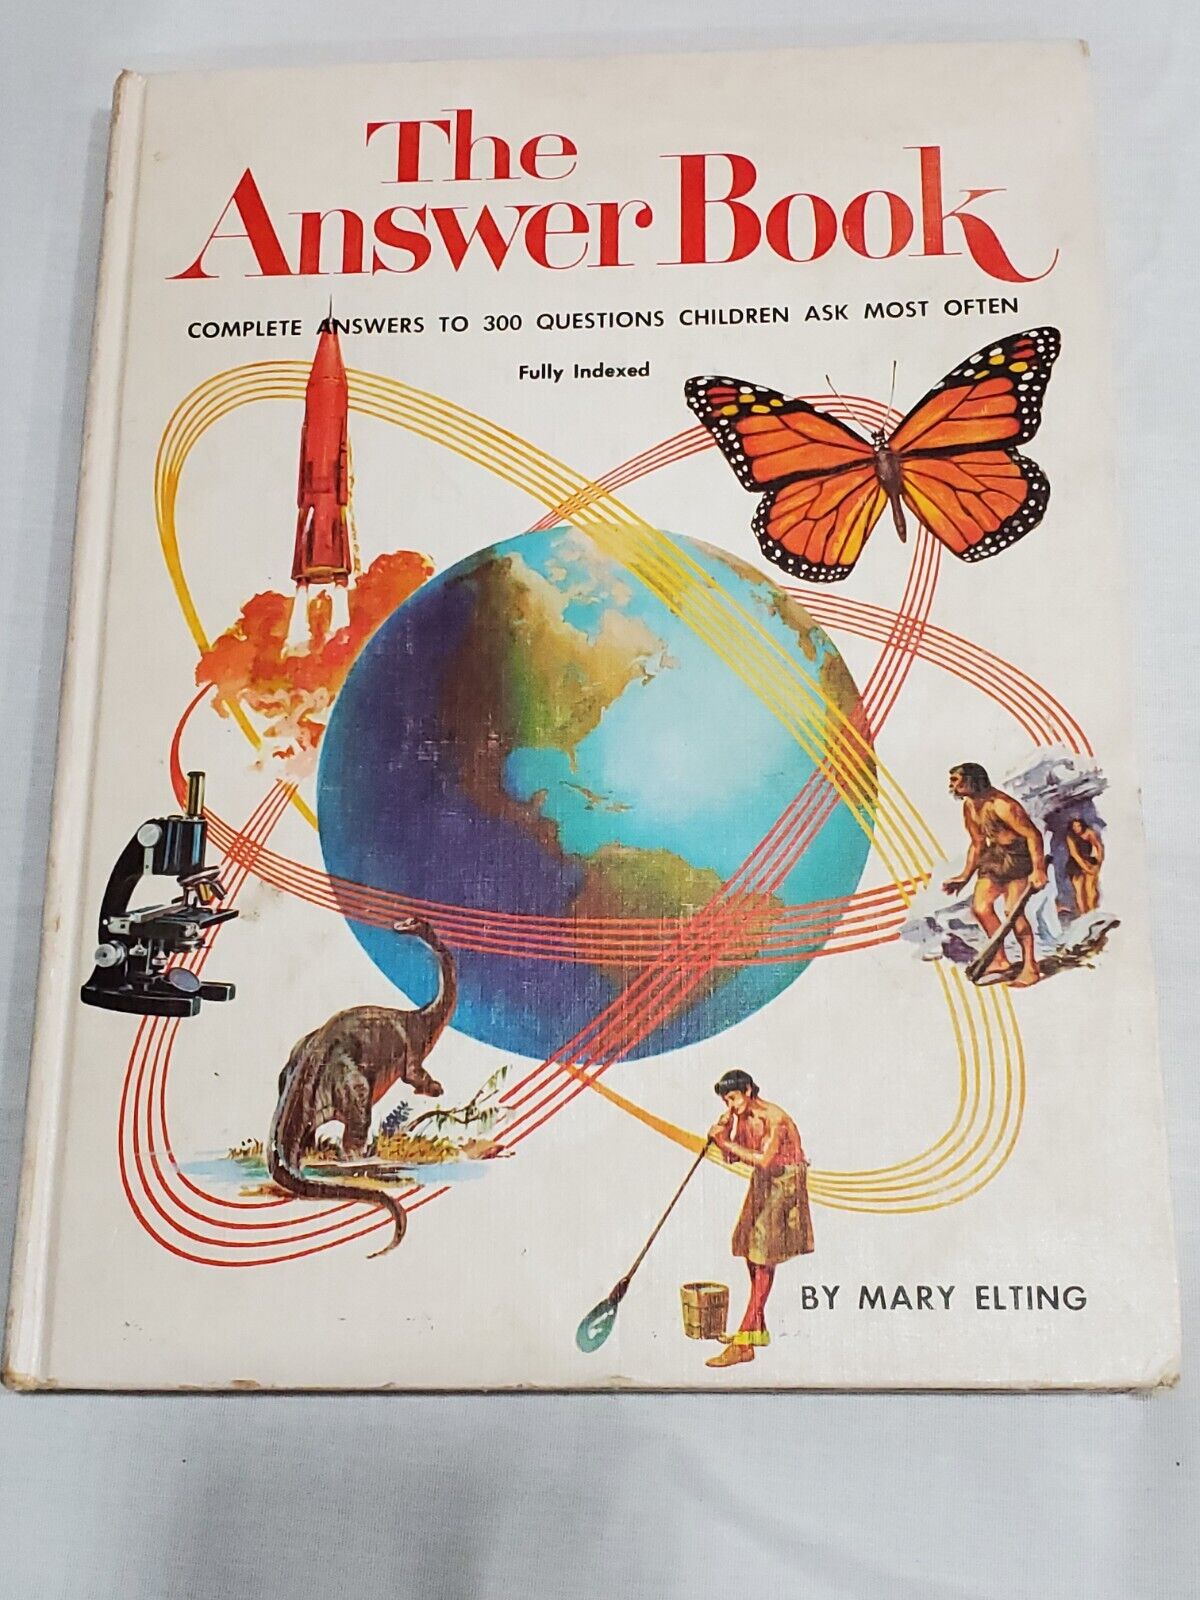 The Answer Book by Mary Elting, Answers to 300 Questions Children Ask Most Often